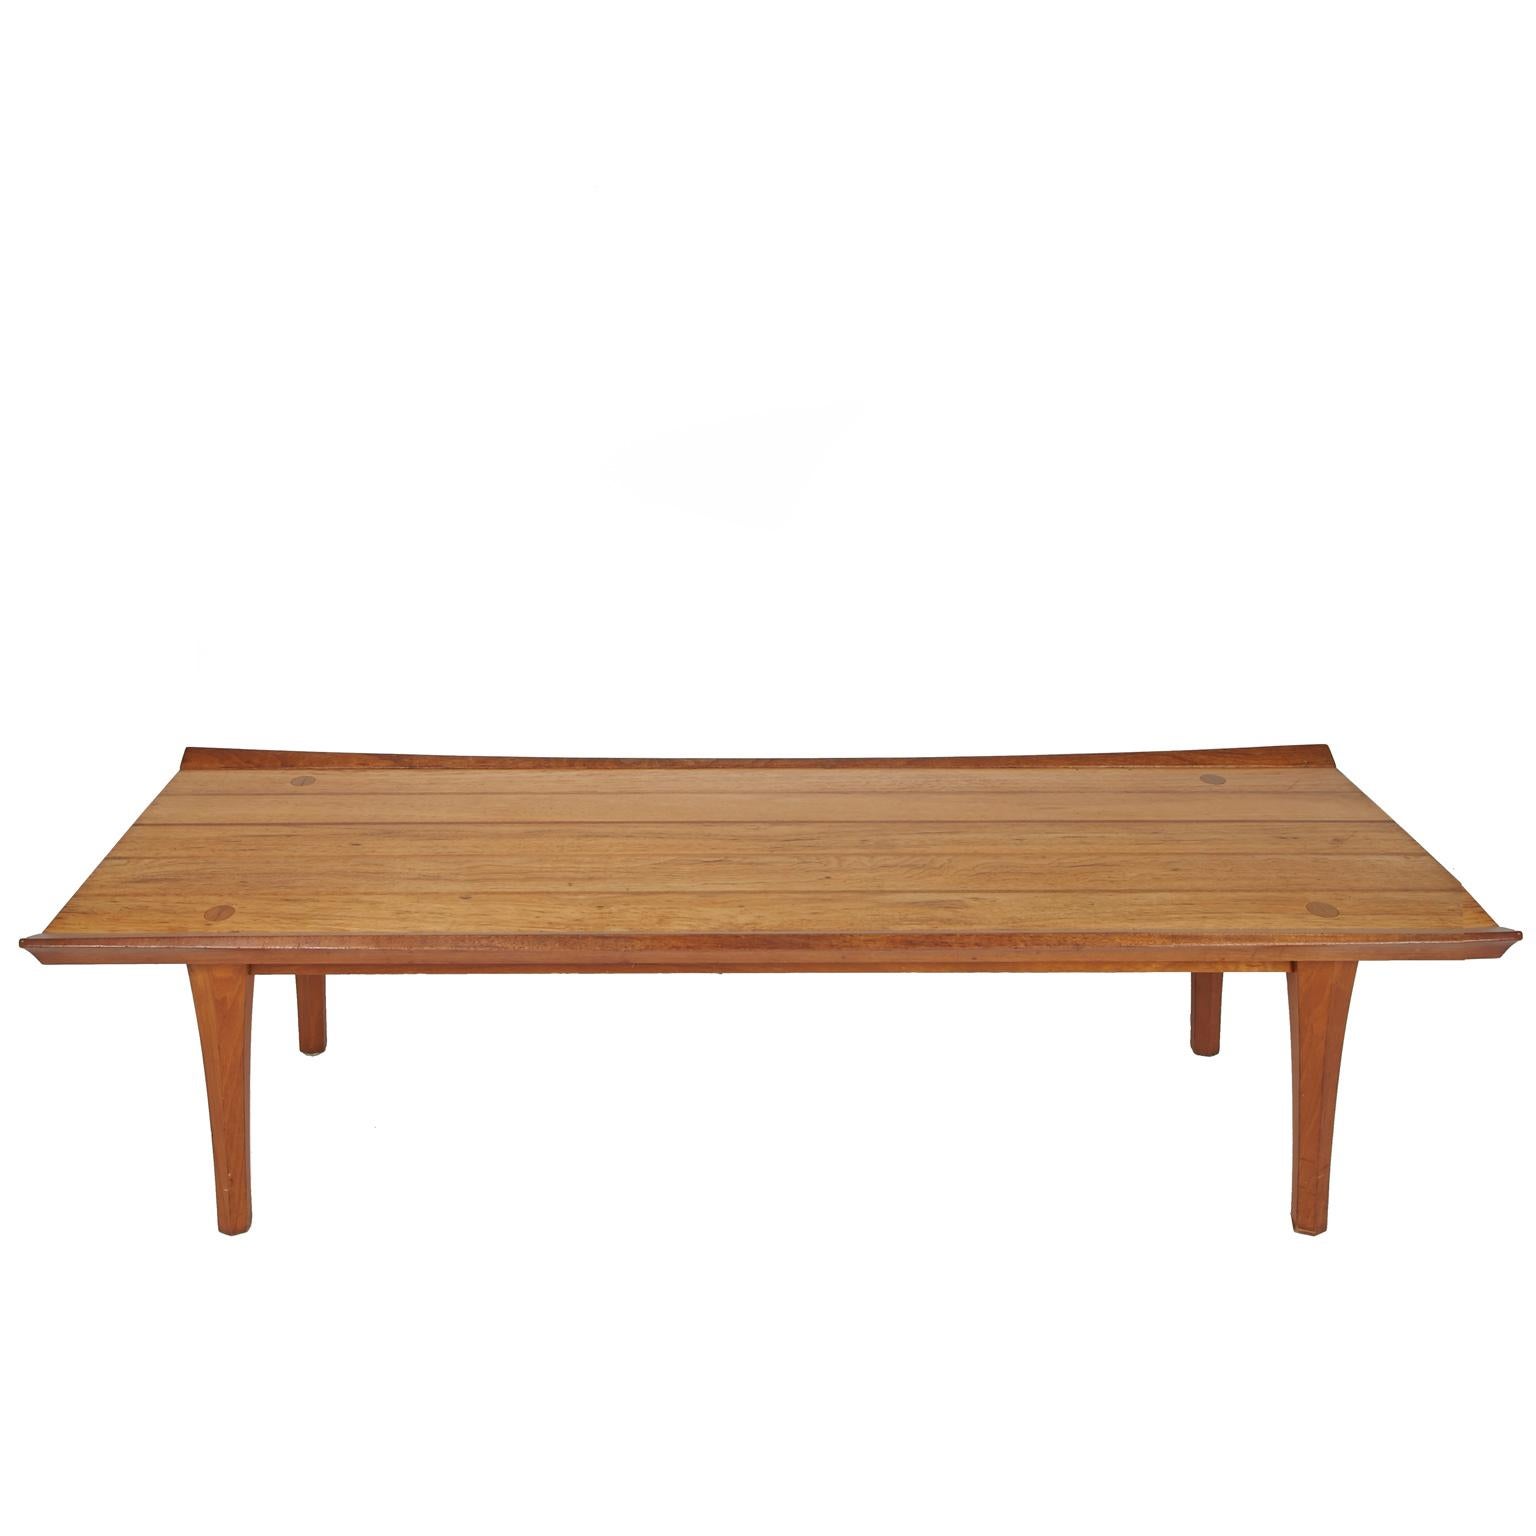 Heritage Mid-Century Modern walnut coffee table with glass top. Beautiful original walnut finish with glass top. Marked Heritage on the bottom of table and dateed 7-61.
  